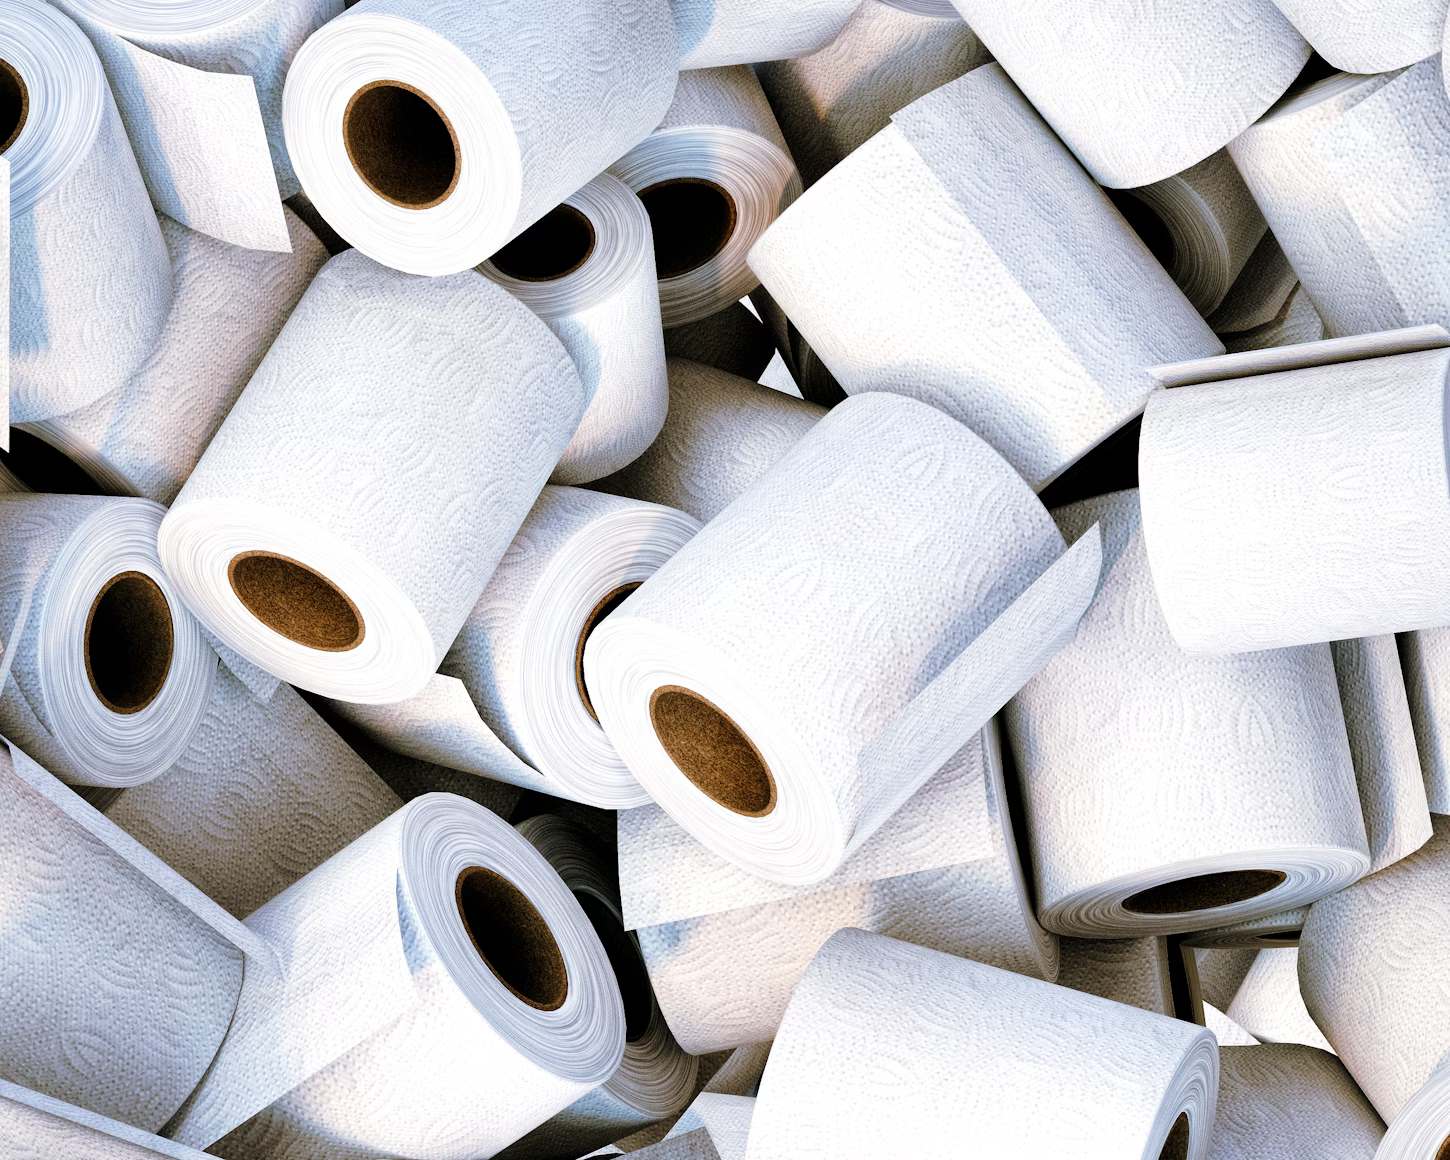 Close-up photo of a pile of toilet papers